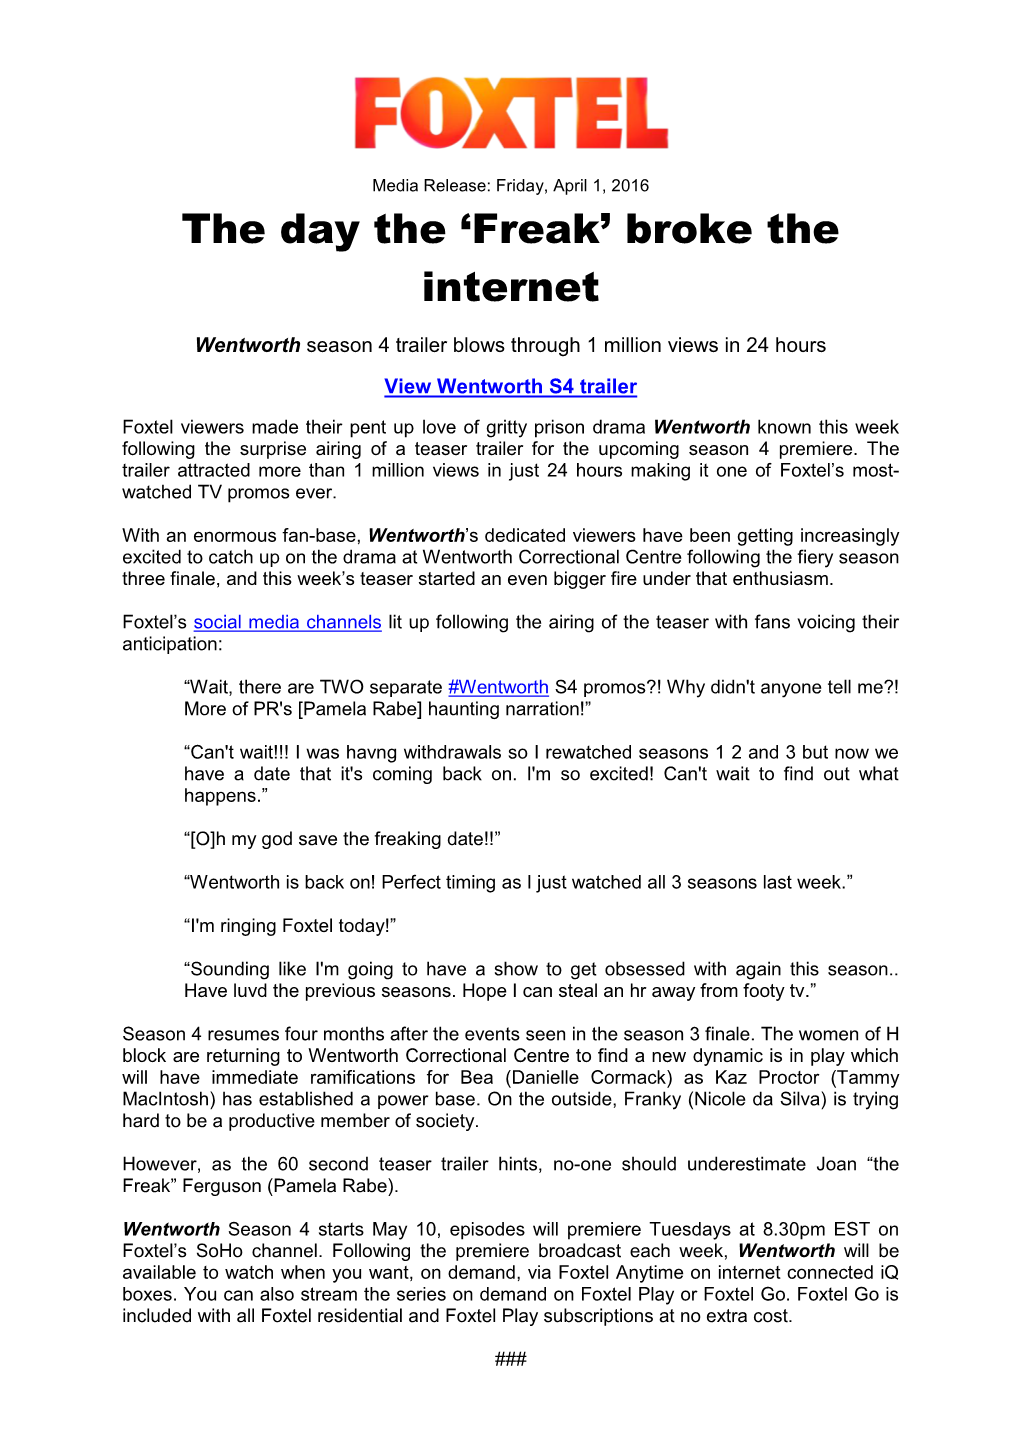 The Day the 'Freak' Broke the Internet